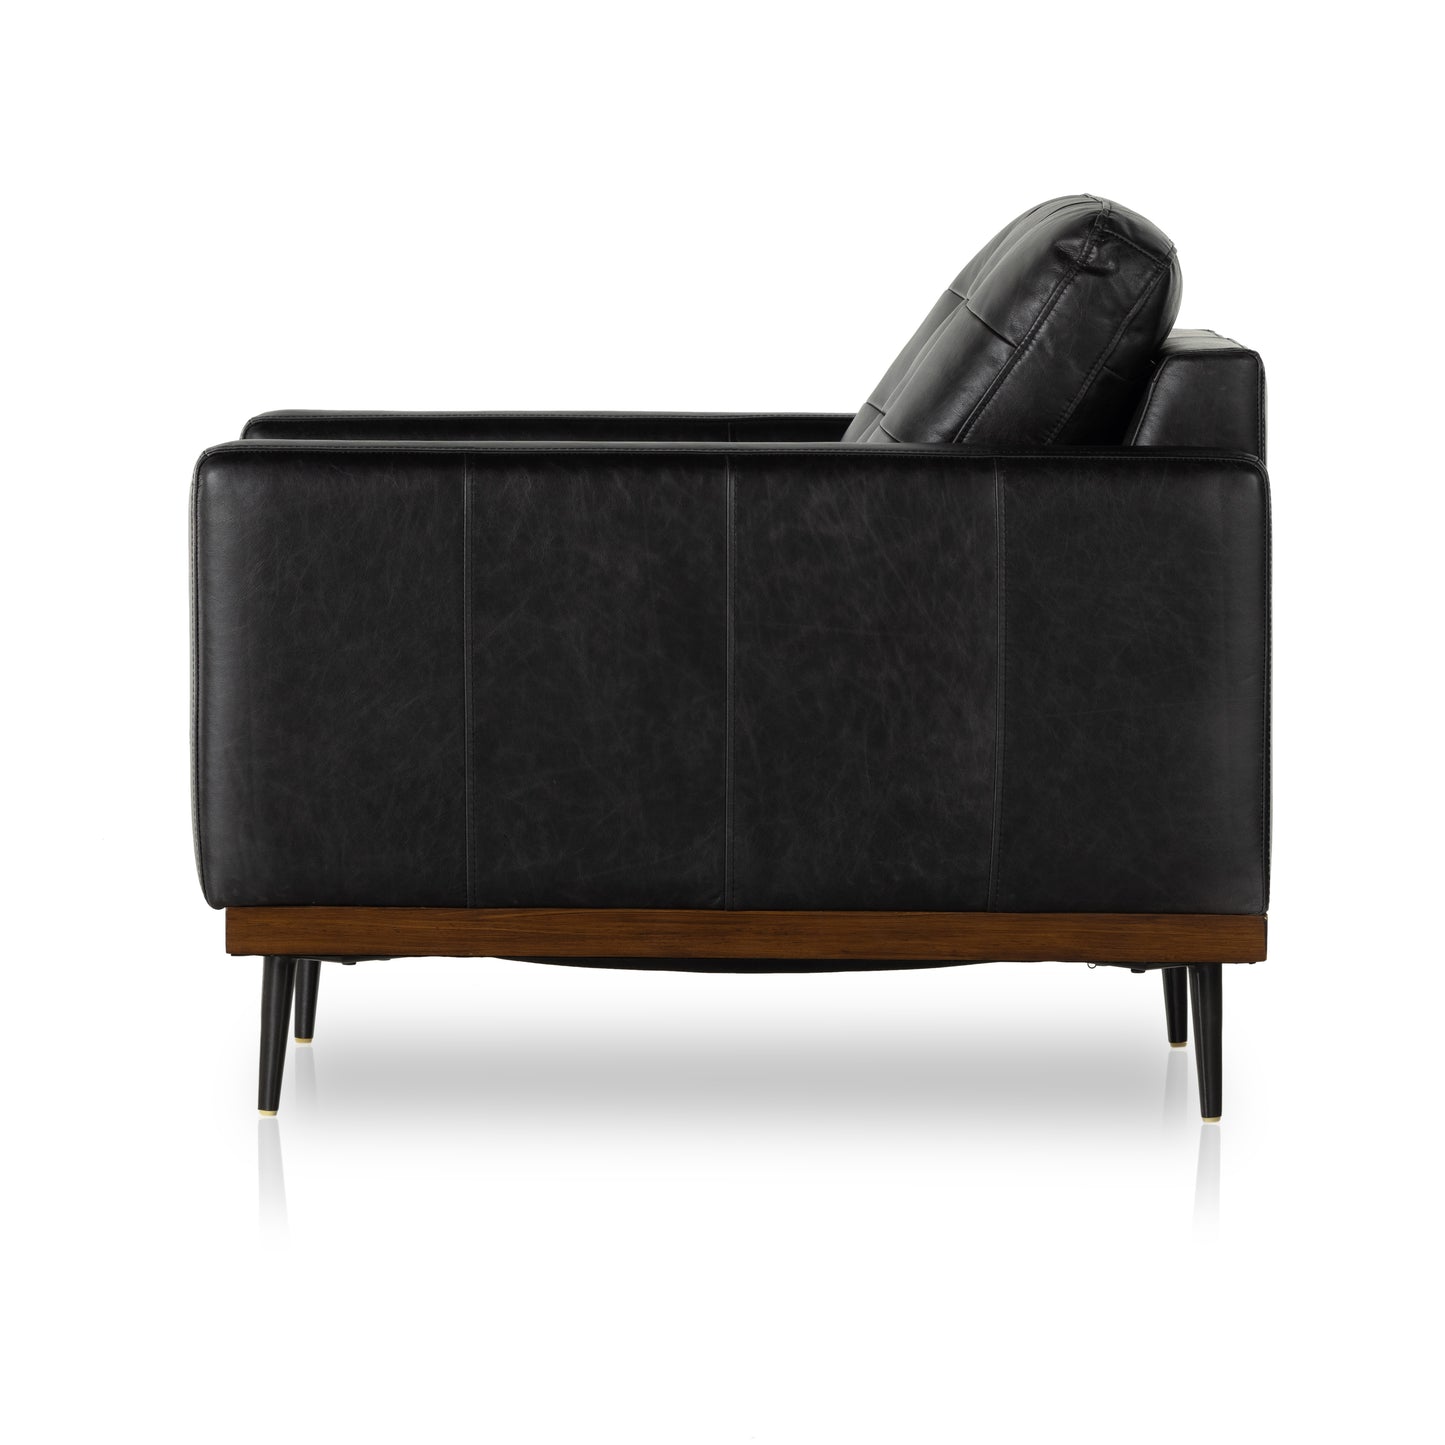 Load image into Gallery viewer, Lexi Chair Lounge Chair Four Hands     Four Hands, Mid Century Modern Furniture, Old Bones Furniture Company, Old Bones Co, Modern Mid Century, Designer Furniture, https://www.oldbonesco.com/
